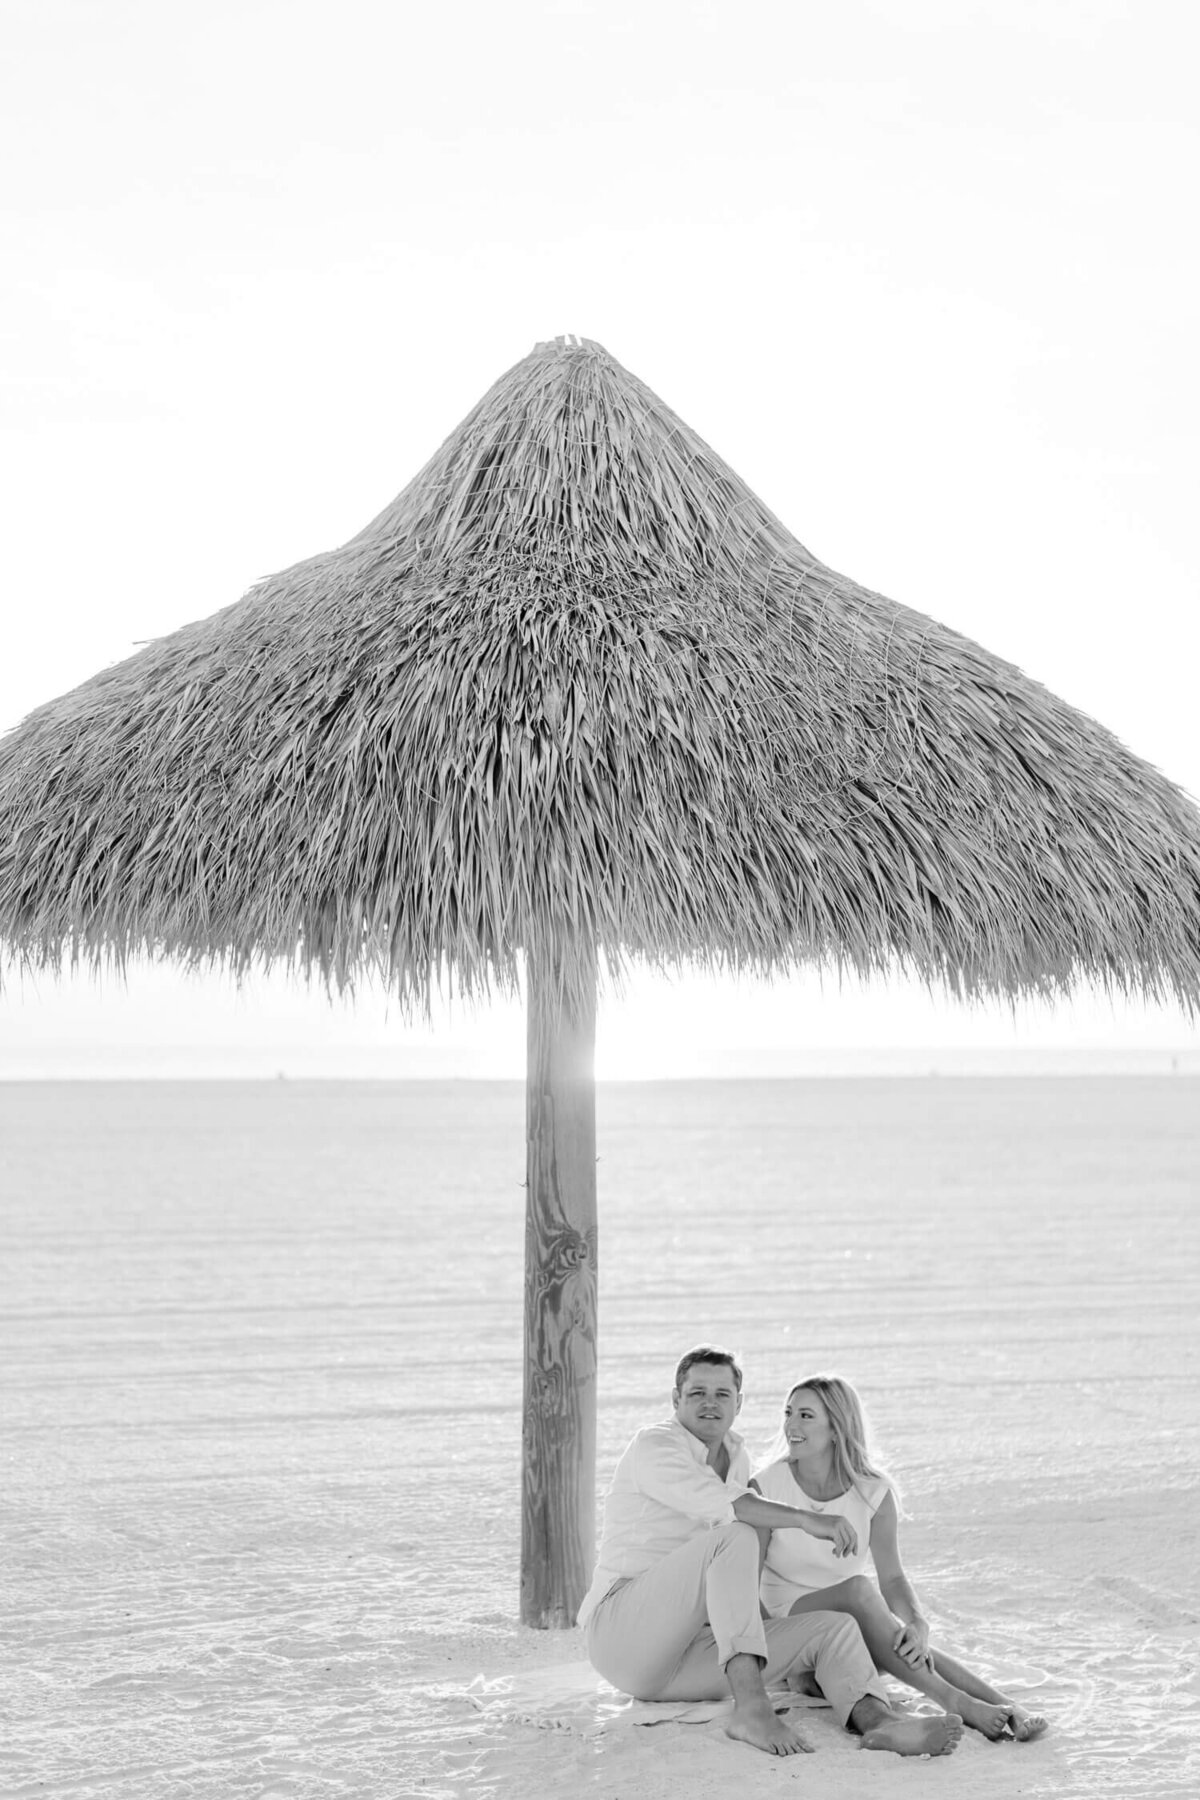 resident's beach marco island engagement photos - brittany bekas-22